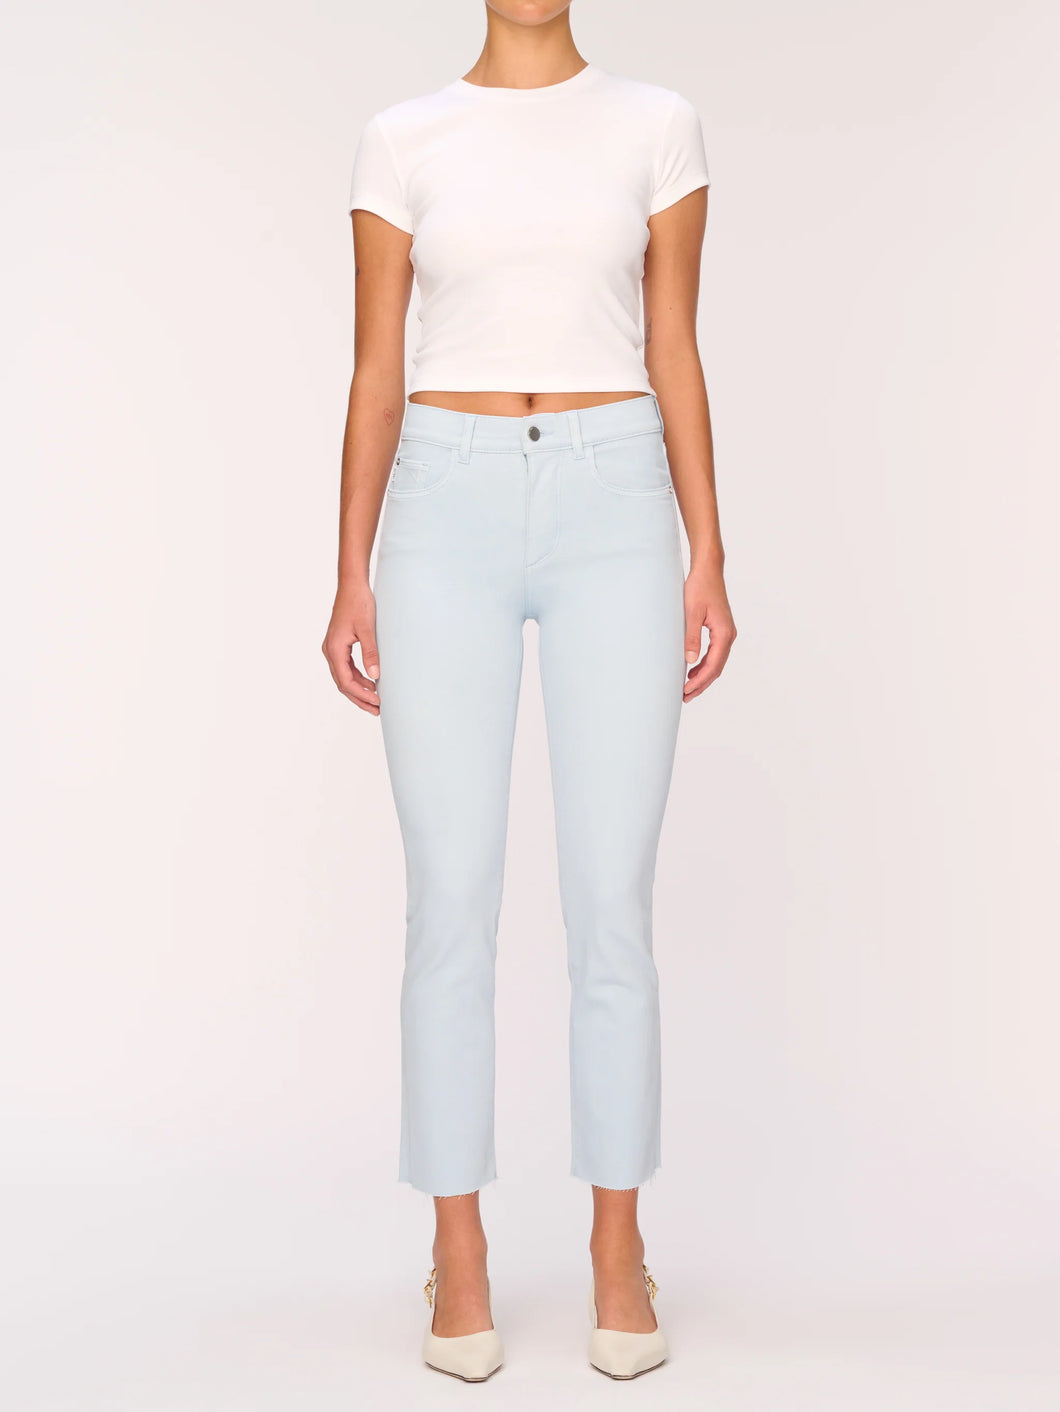 Mara Straight Instasculpt Jeans in Cerulean by DL1961